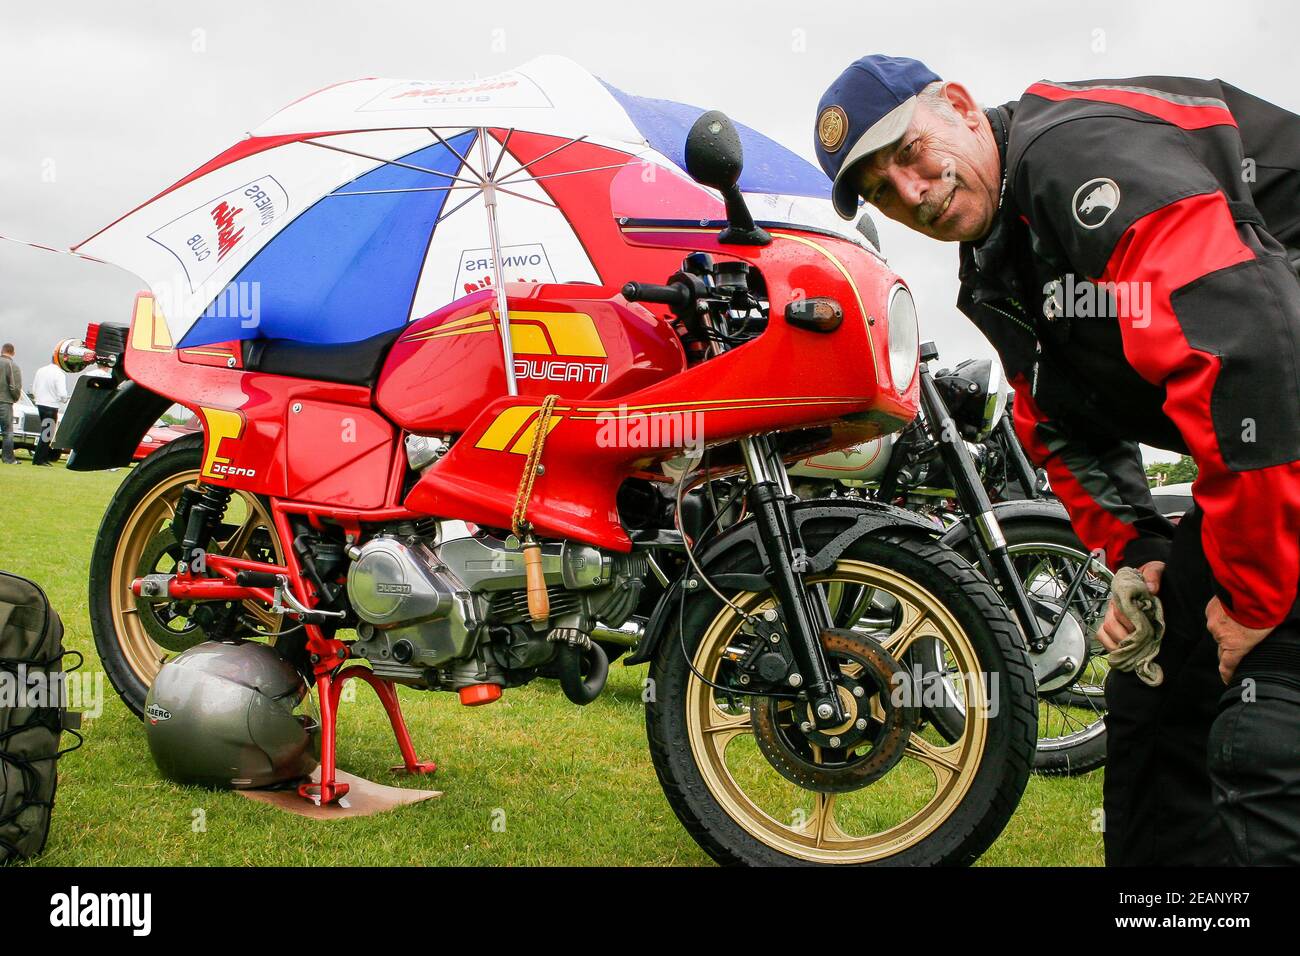 Proud owner of red Ducati motorbike exhibiting at a classic car show, UK Stock Photo